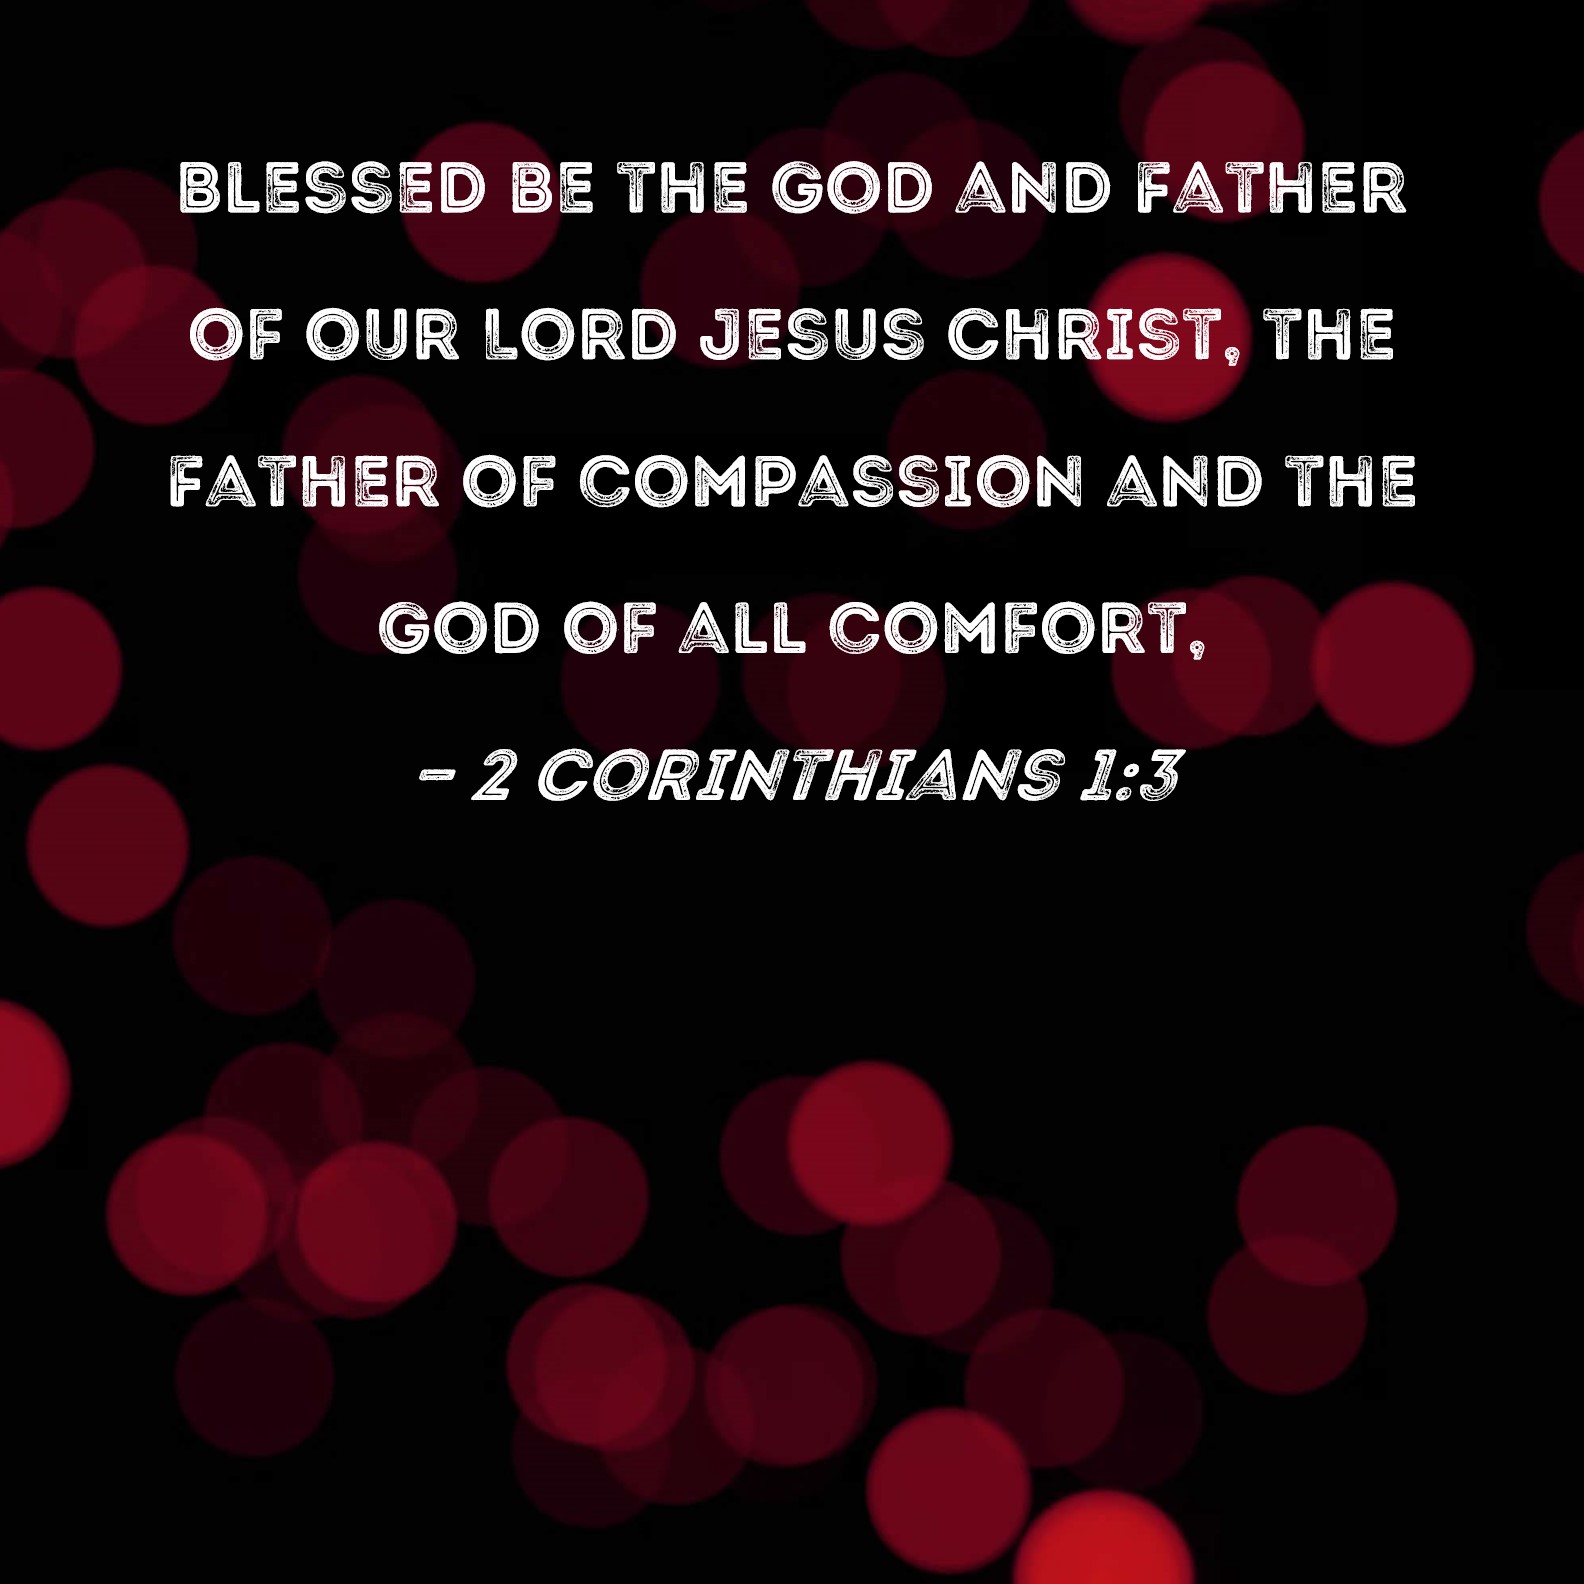 2 Corinthians 1:3 Blessed be the God and Father of our Lord Jesus Christ,  the Father of compassion and the God of all comfort